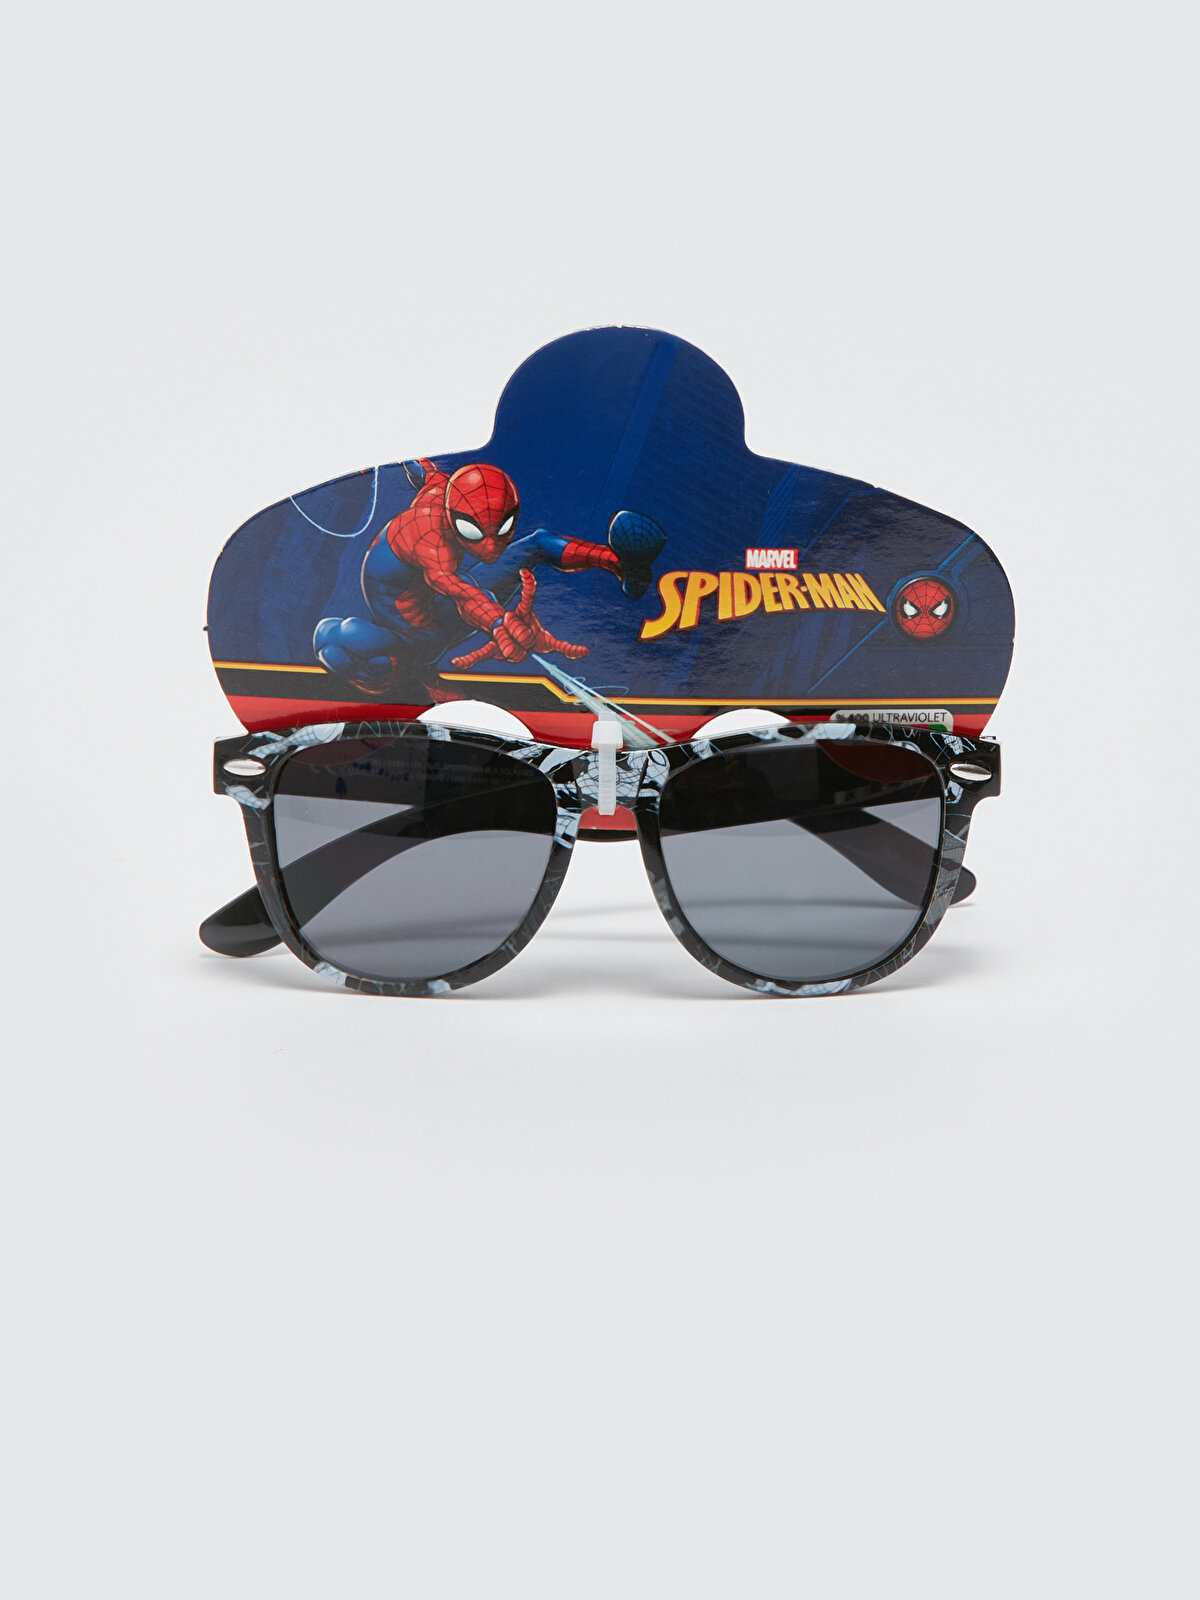 Spider-Man Baseball Cap and Sunglasses for Kids